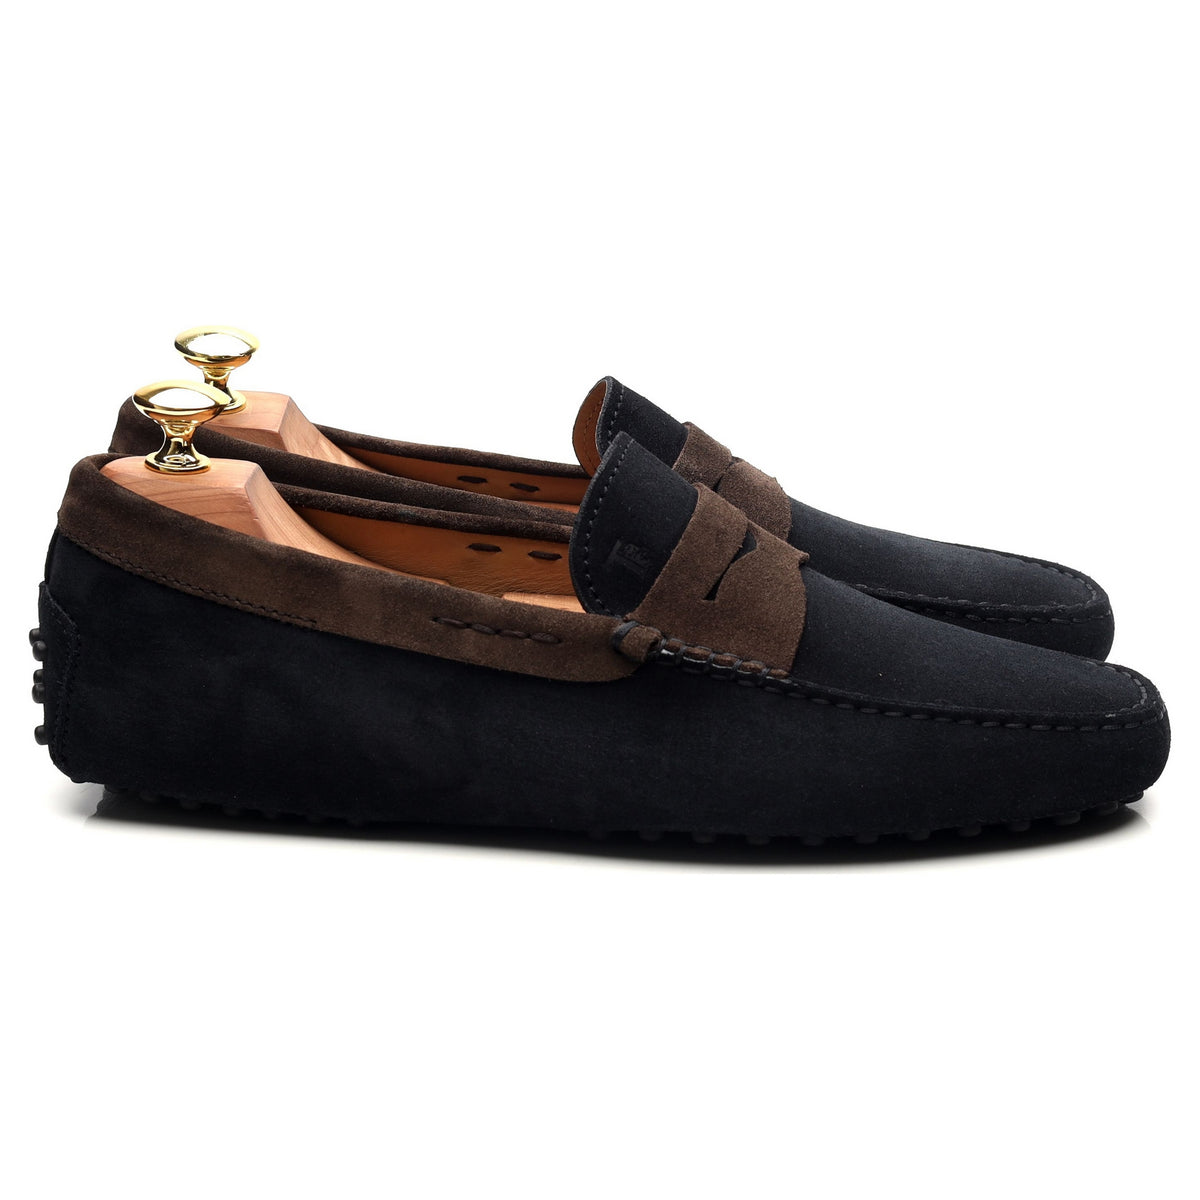 Gommino Navy Blue Suede Driving Loafers UK 8